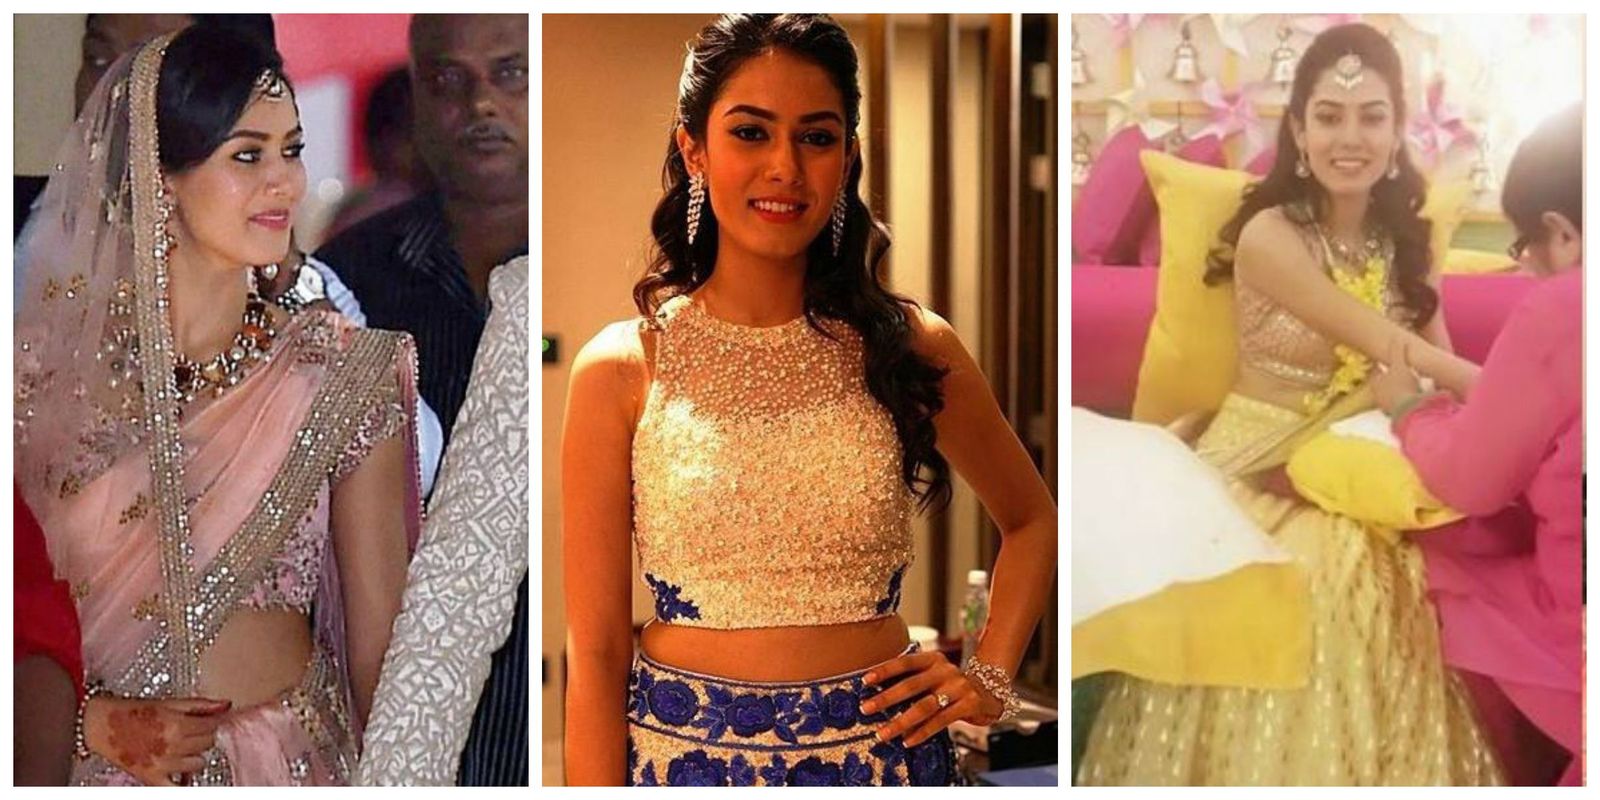 Many Looks of Mira Rajput From Her Wedding